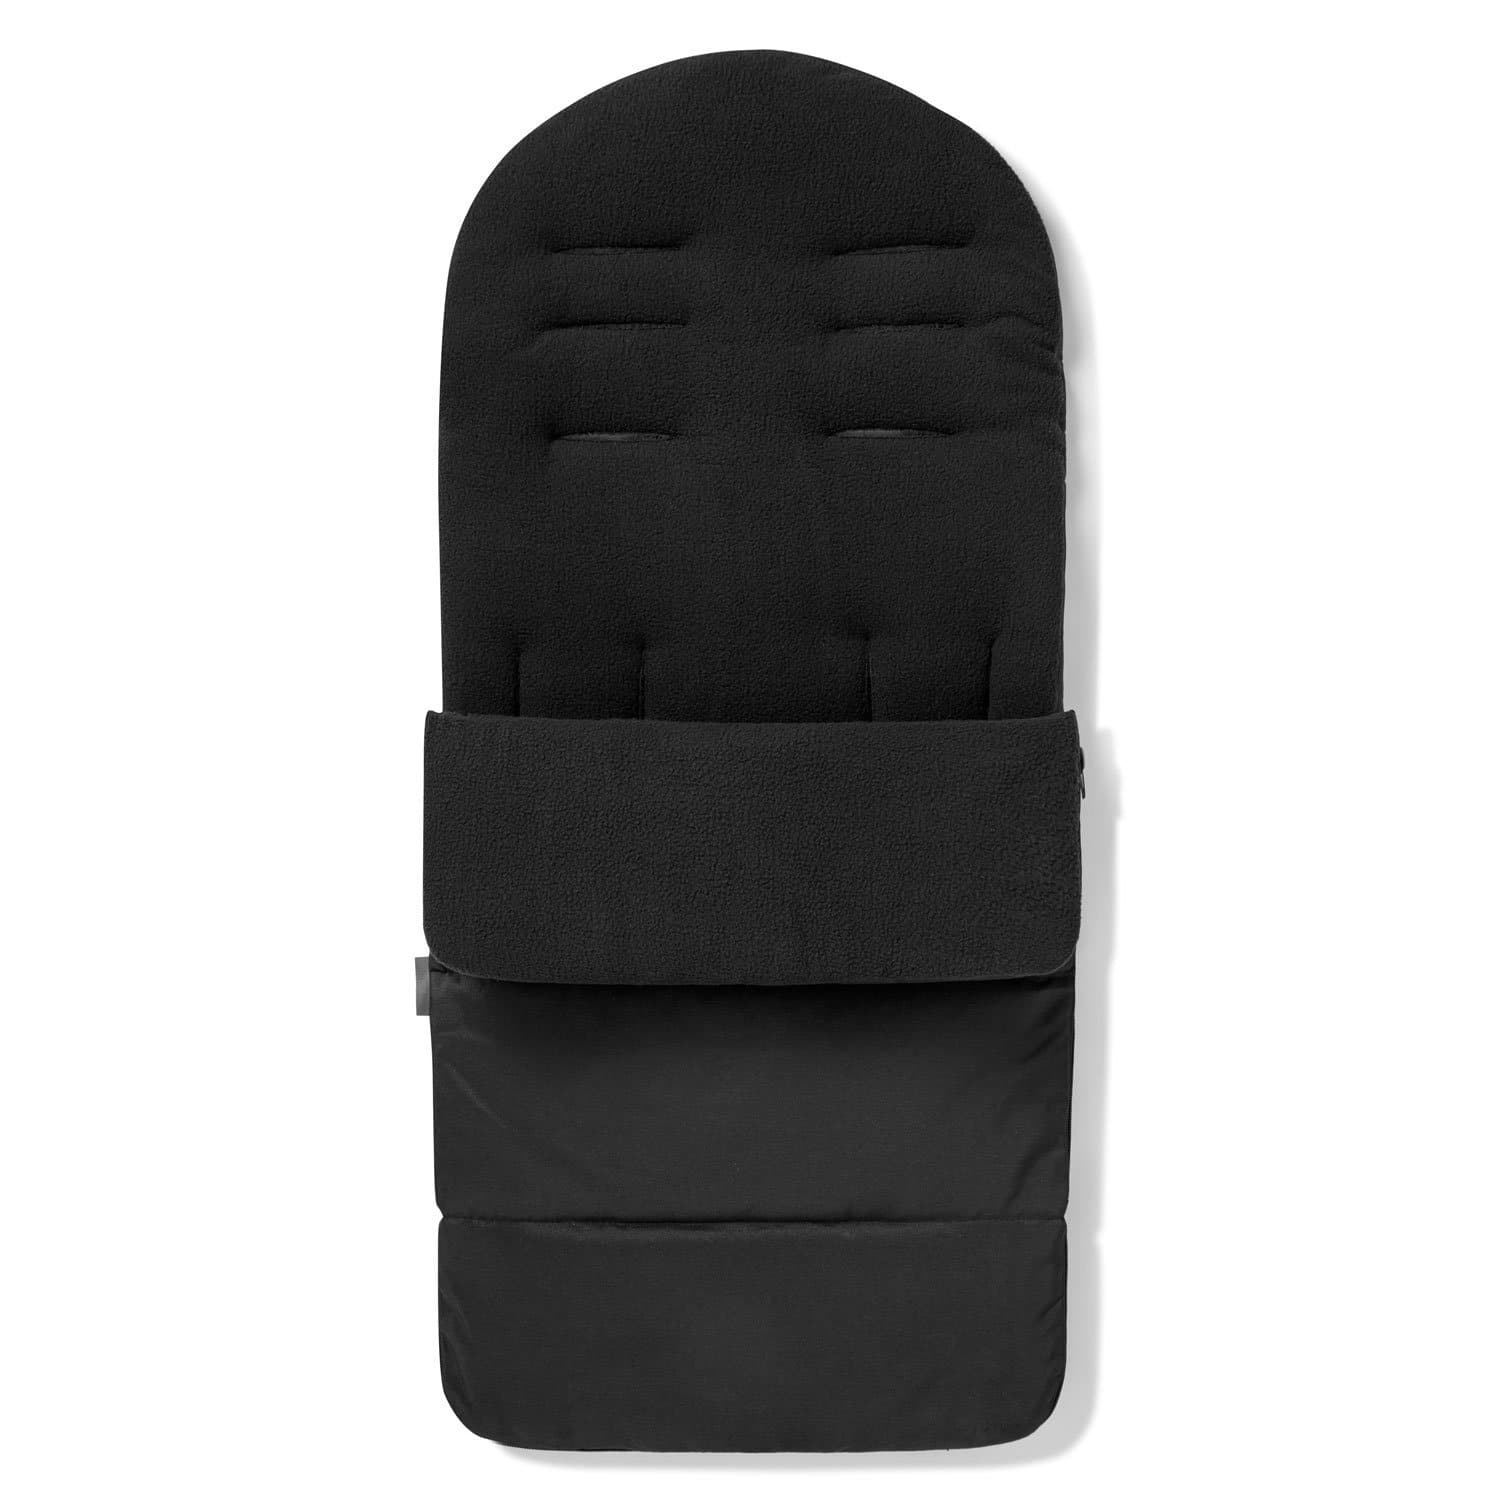 Premium Footmuff / Cosy Toes Compatible with Looping - Black Jack / Fits All Models | For Your Little One